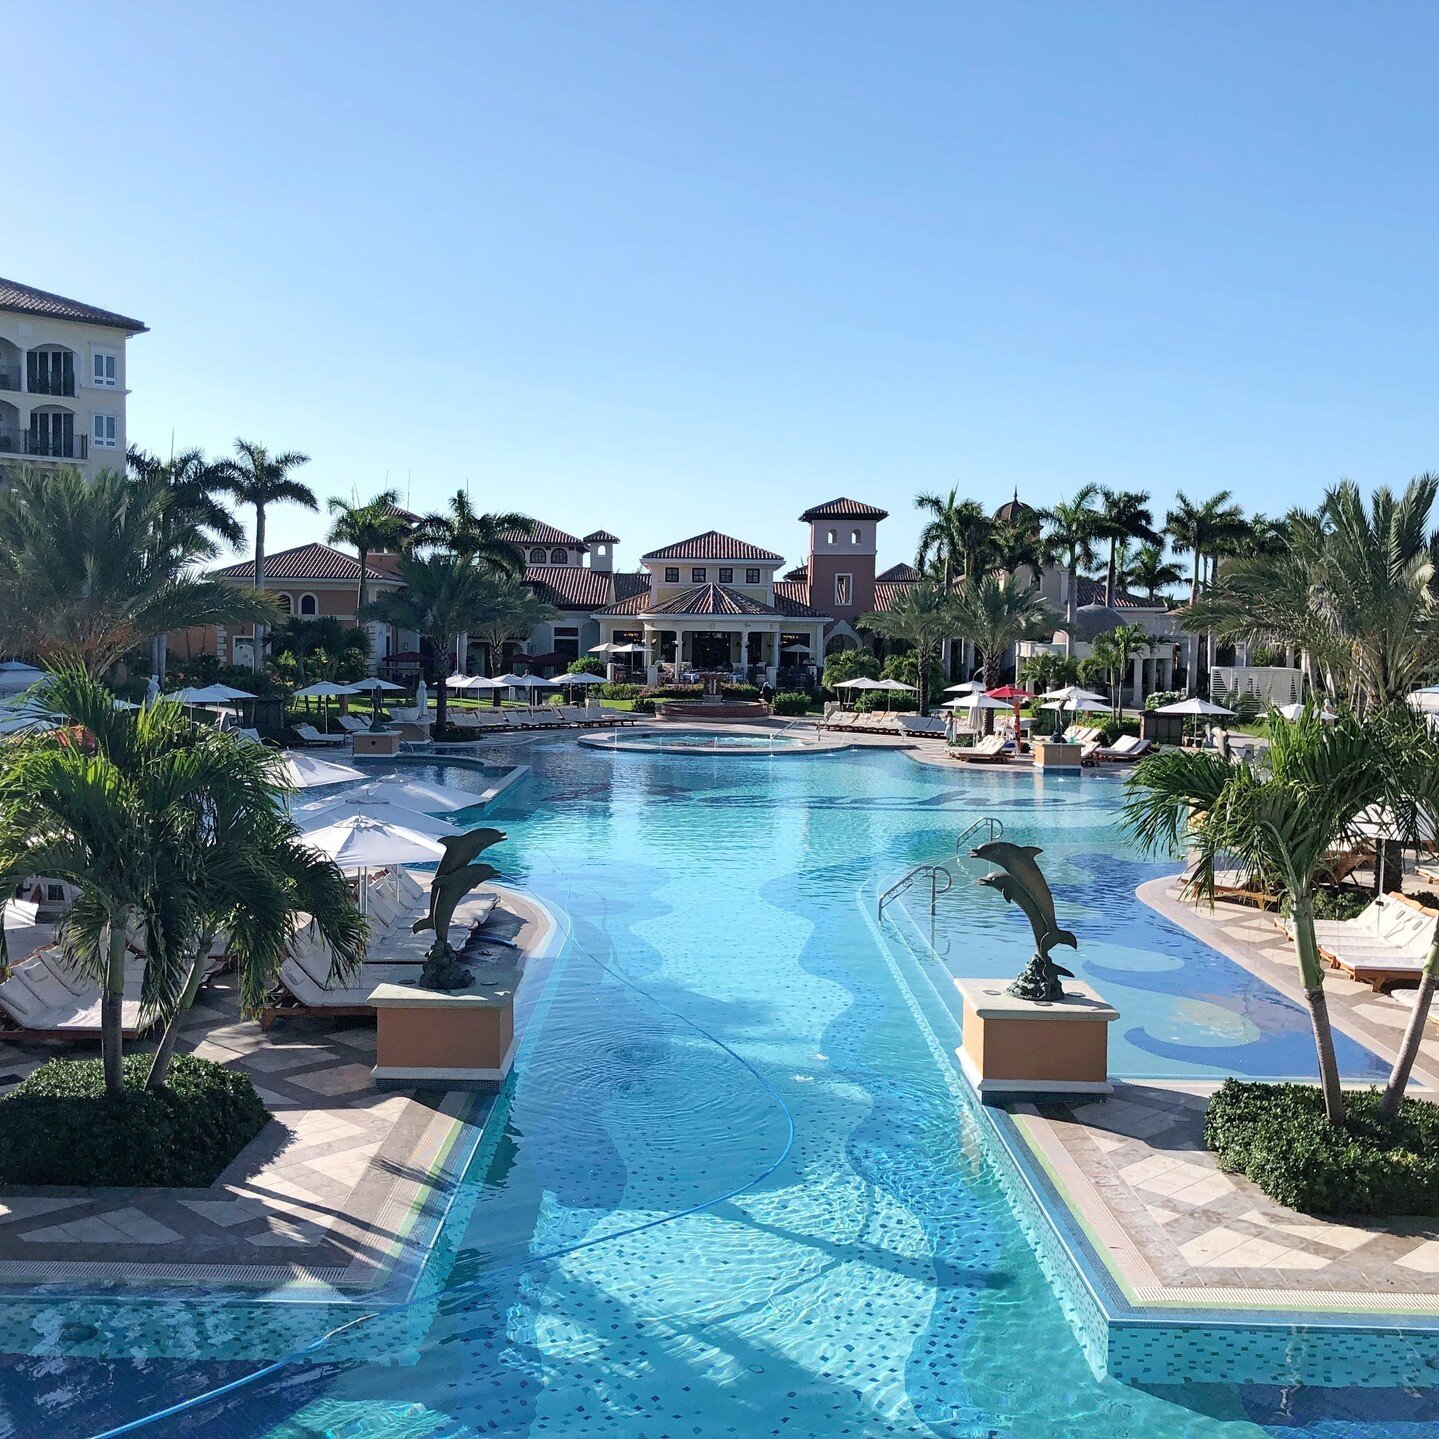 &quot;Andrea was awesome to work with! Her suggestions for our Beaches Turks &amp; Caicos trip were spot on! We had a fabulous time and would recommend booking a Sandals/Beaches trip through her... she is extremely informative about the property and 